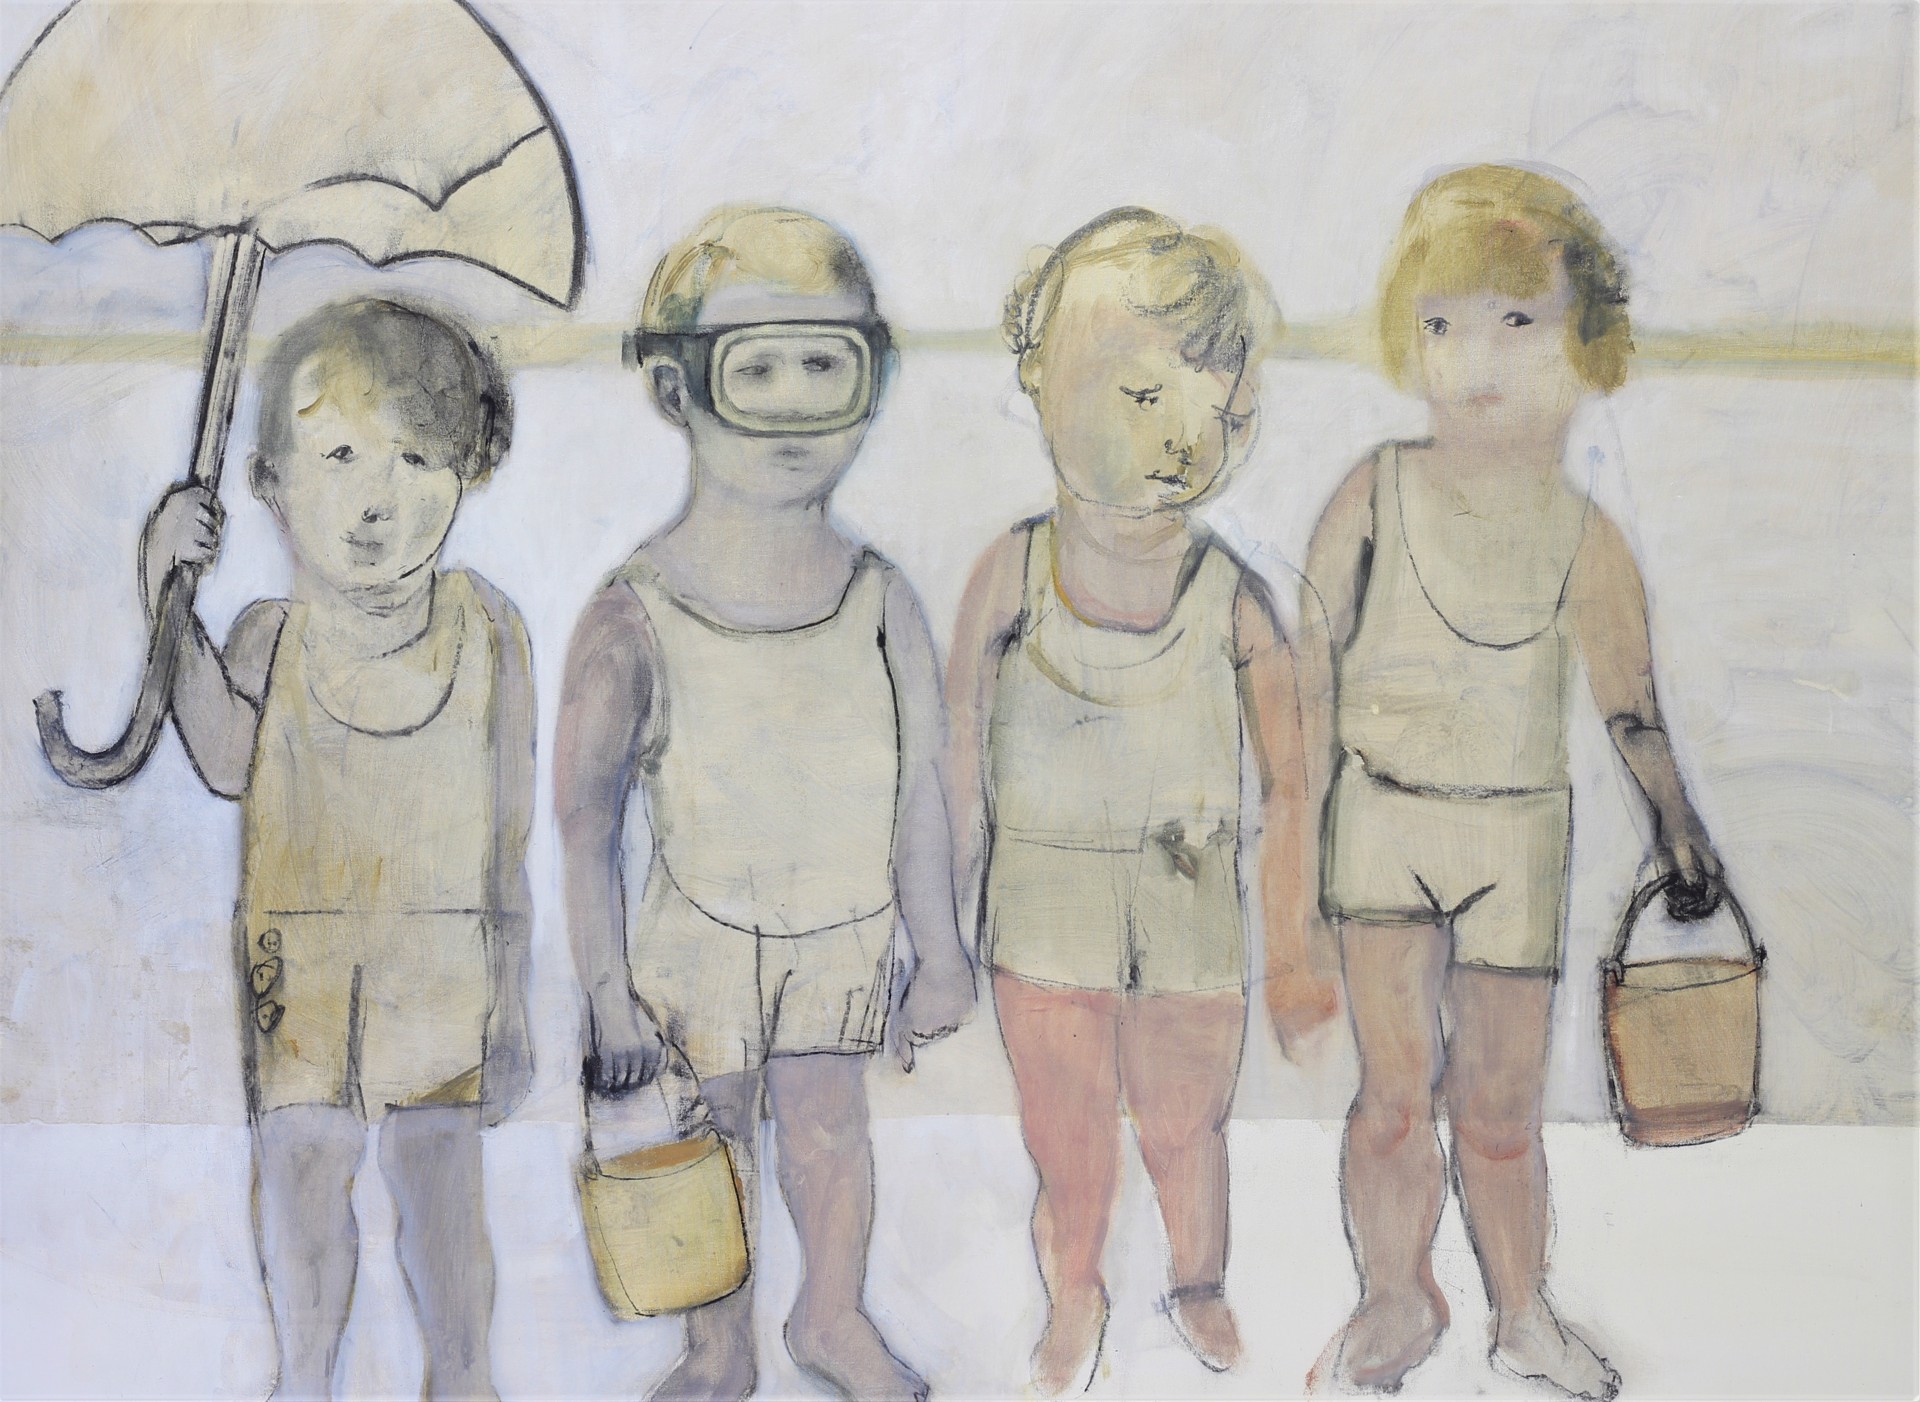 SEARCHING FOR CRABS by CHRISTINA THWAITES (Figures)